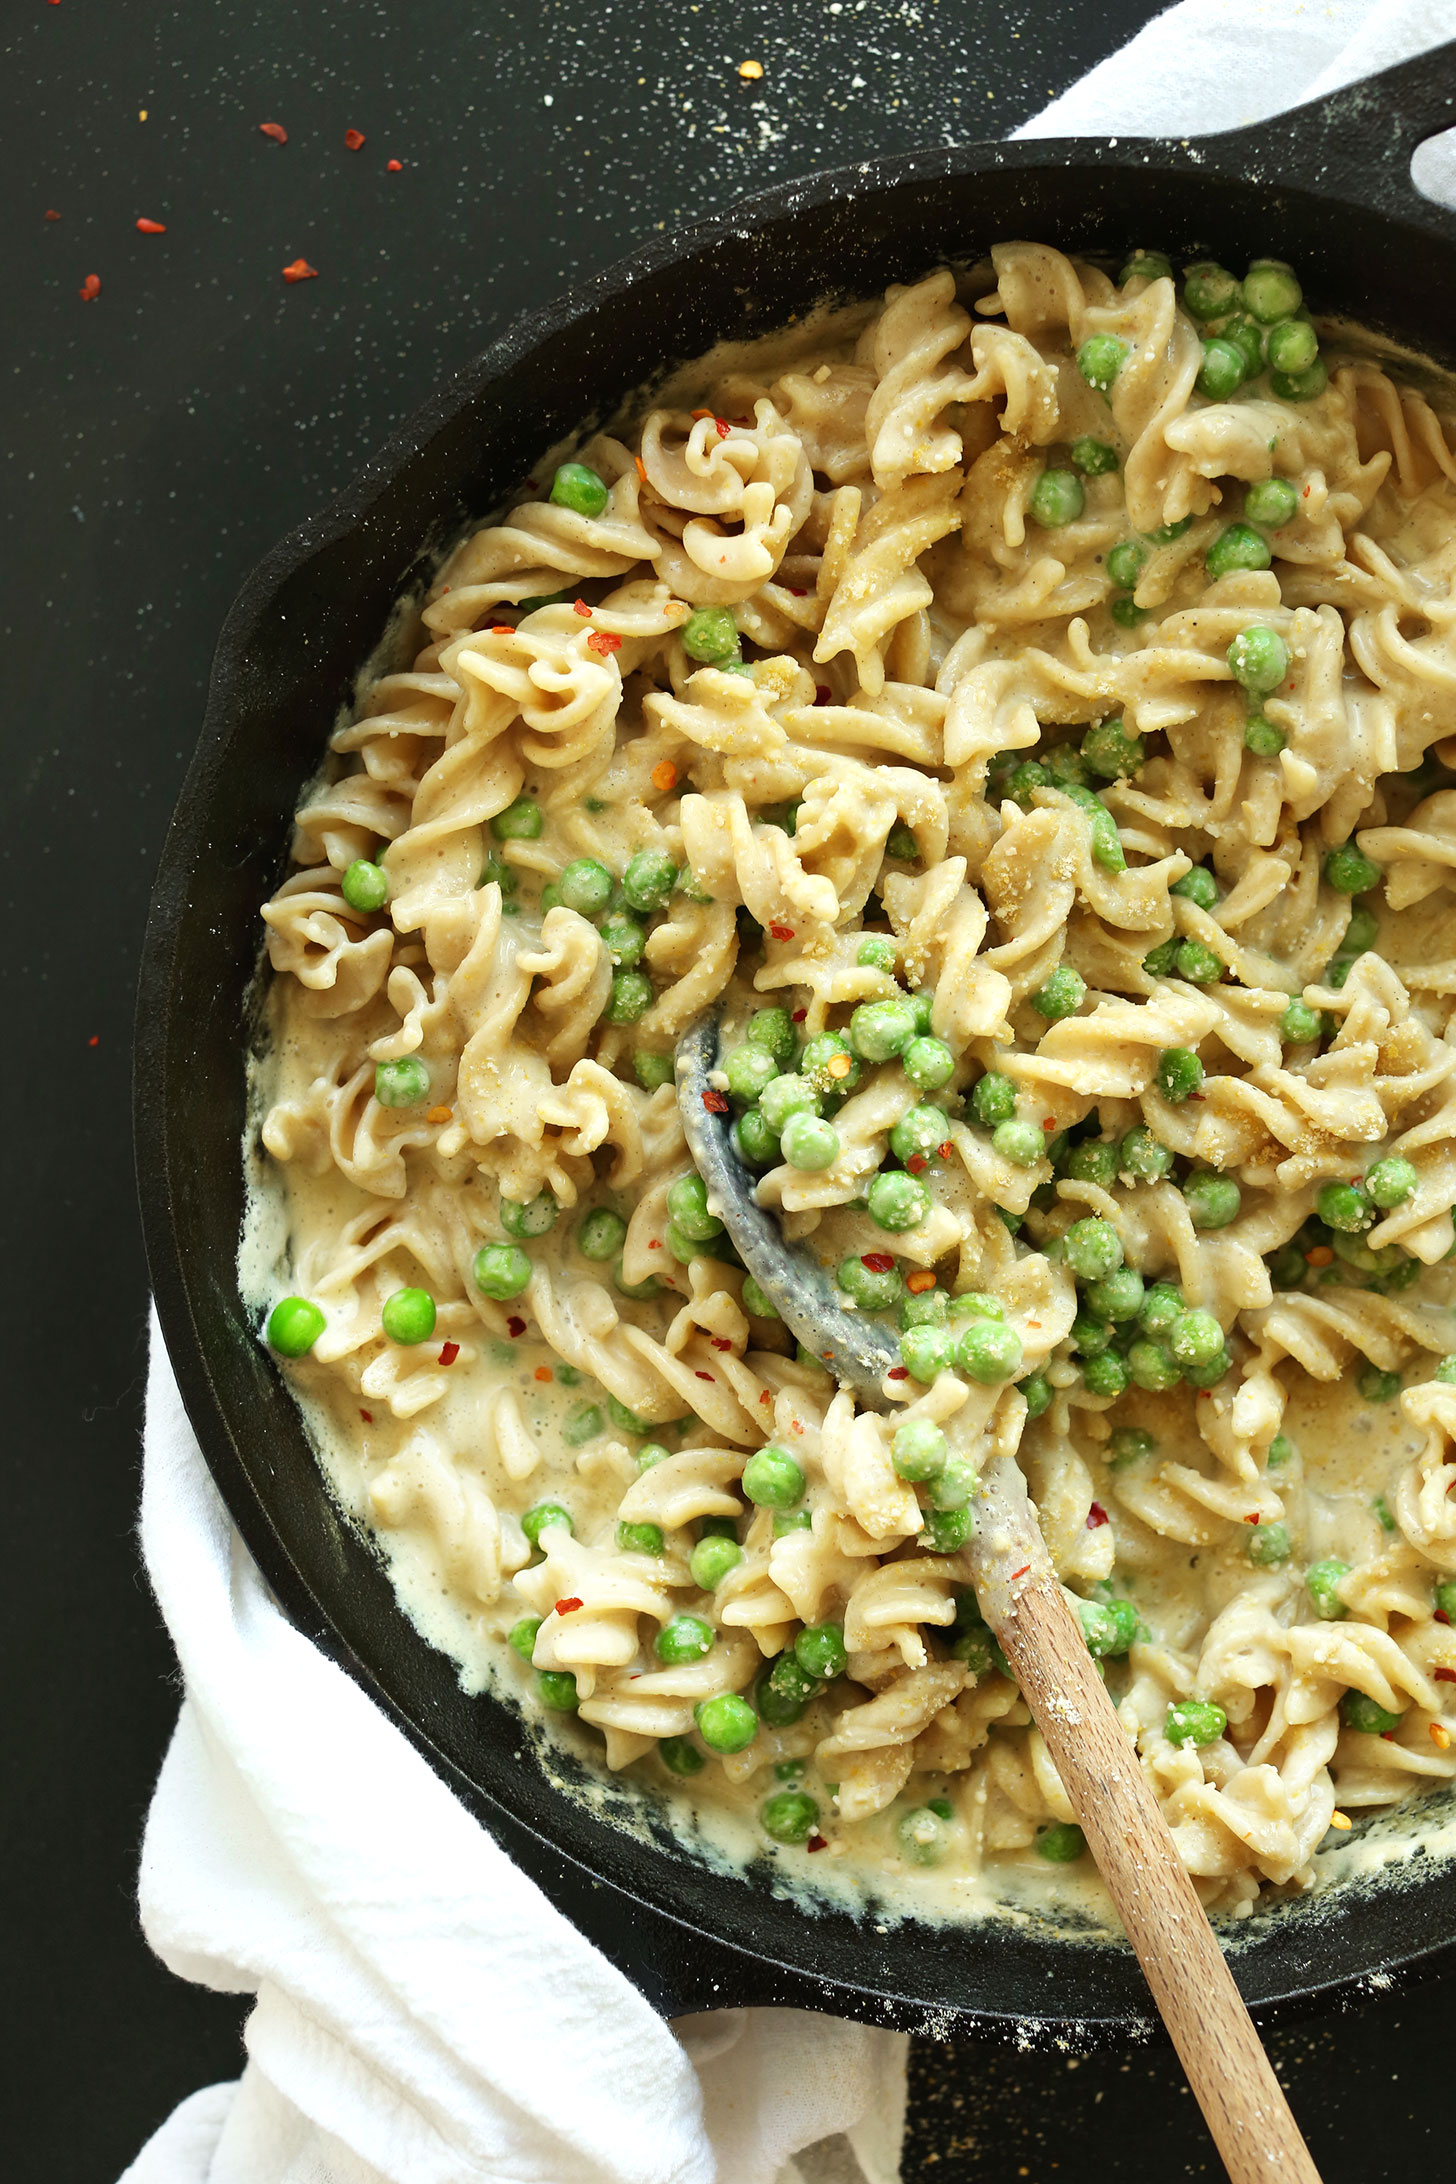 Cast-iron skillet filled with our Vegan Alfredo Pasta with peas